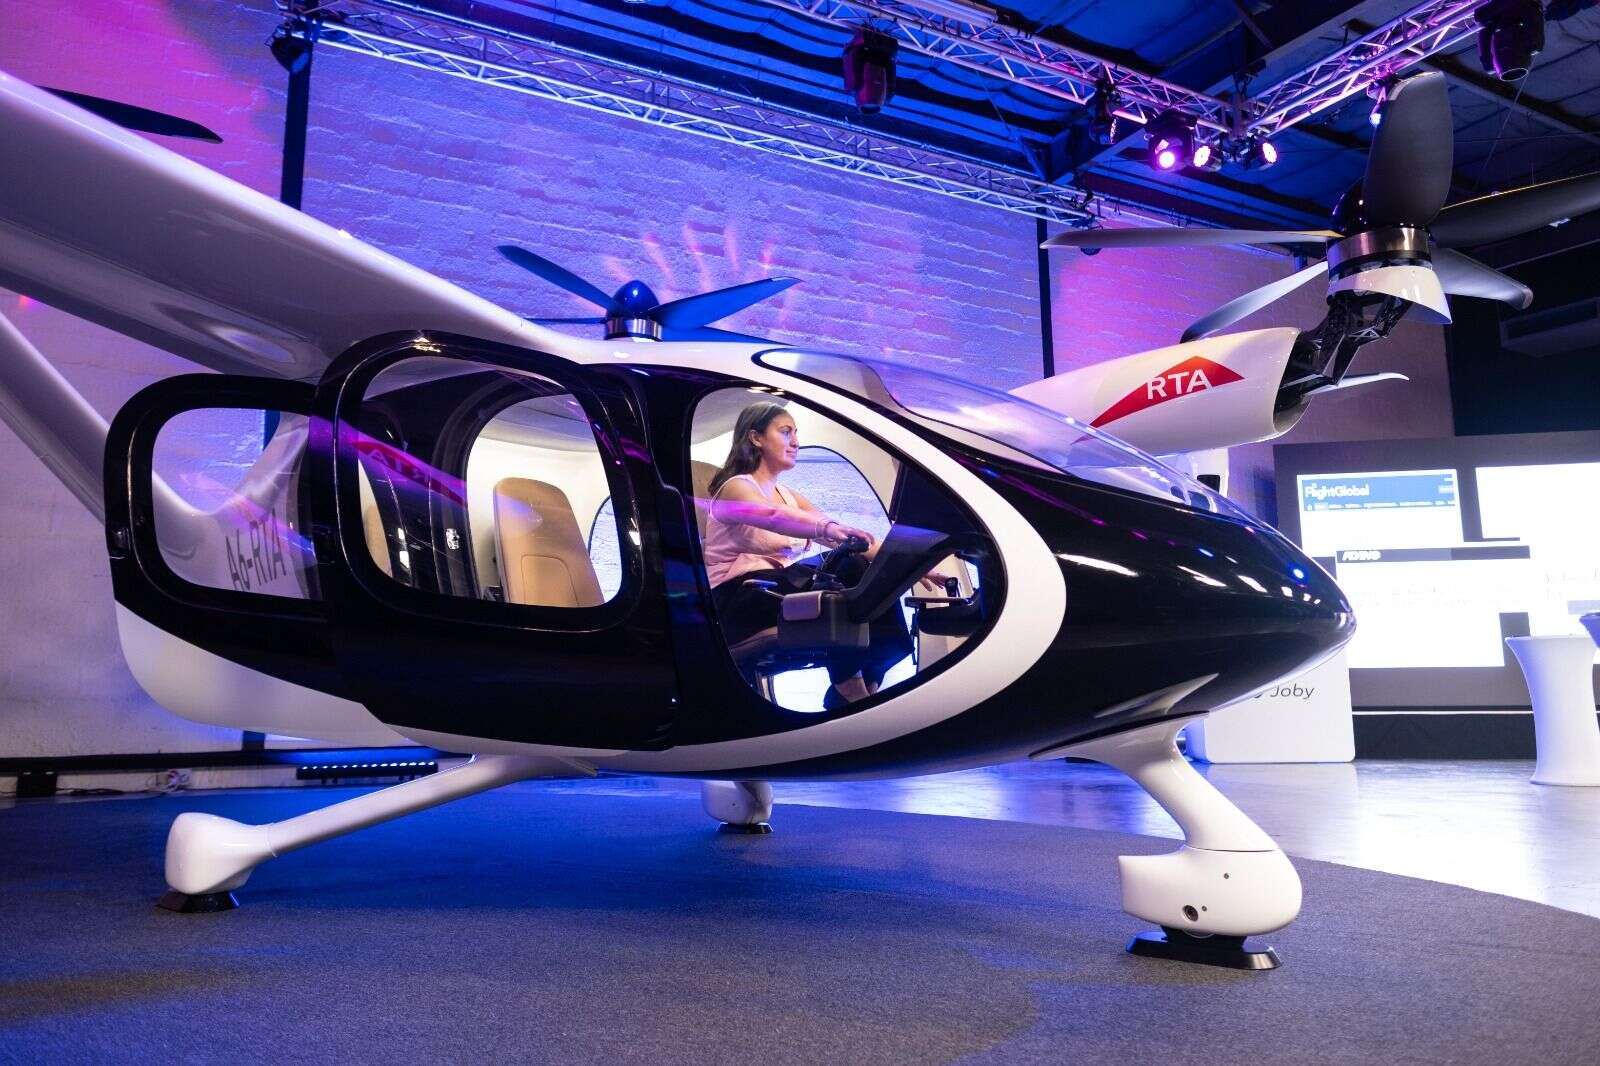 dubai: dh350 air taxi rides to cut travel time from 45 minutes to 10